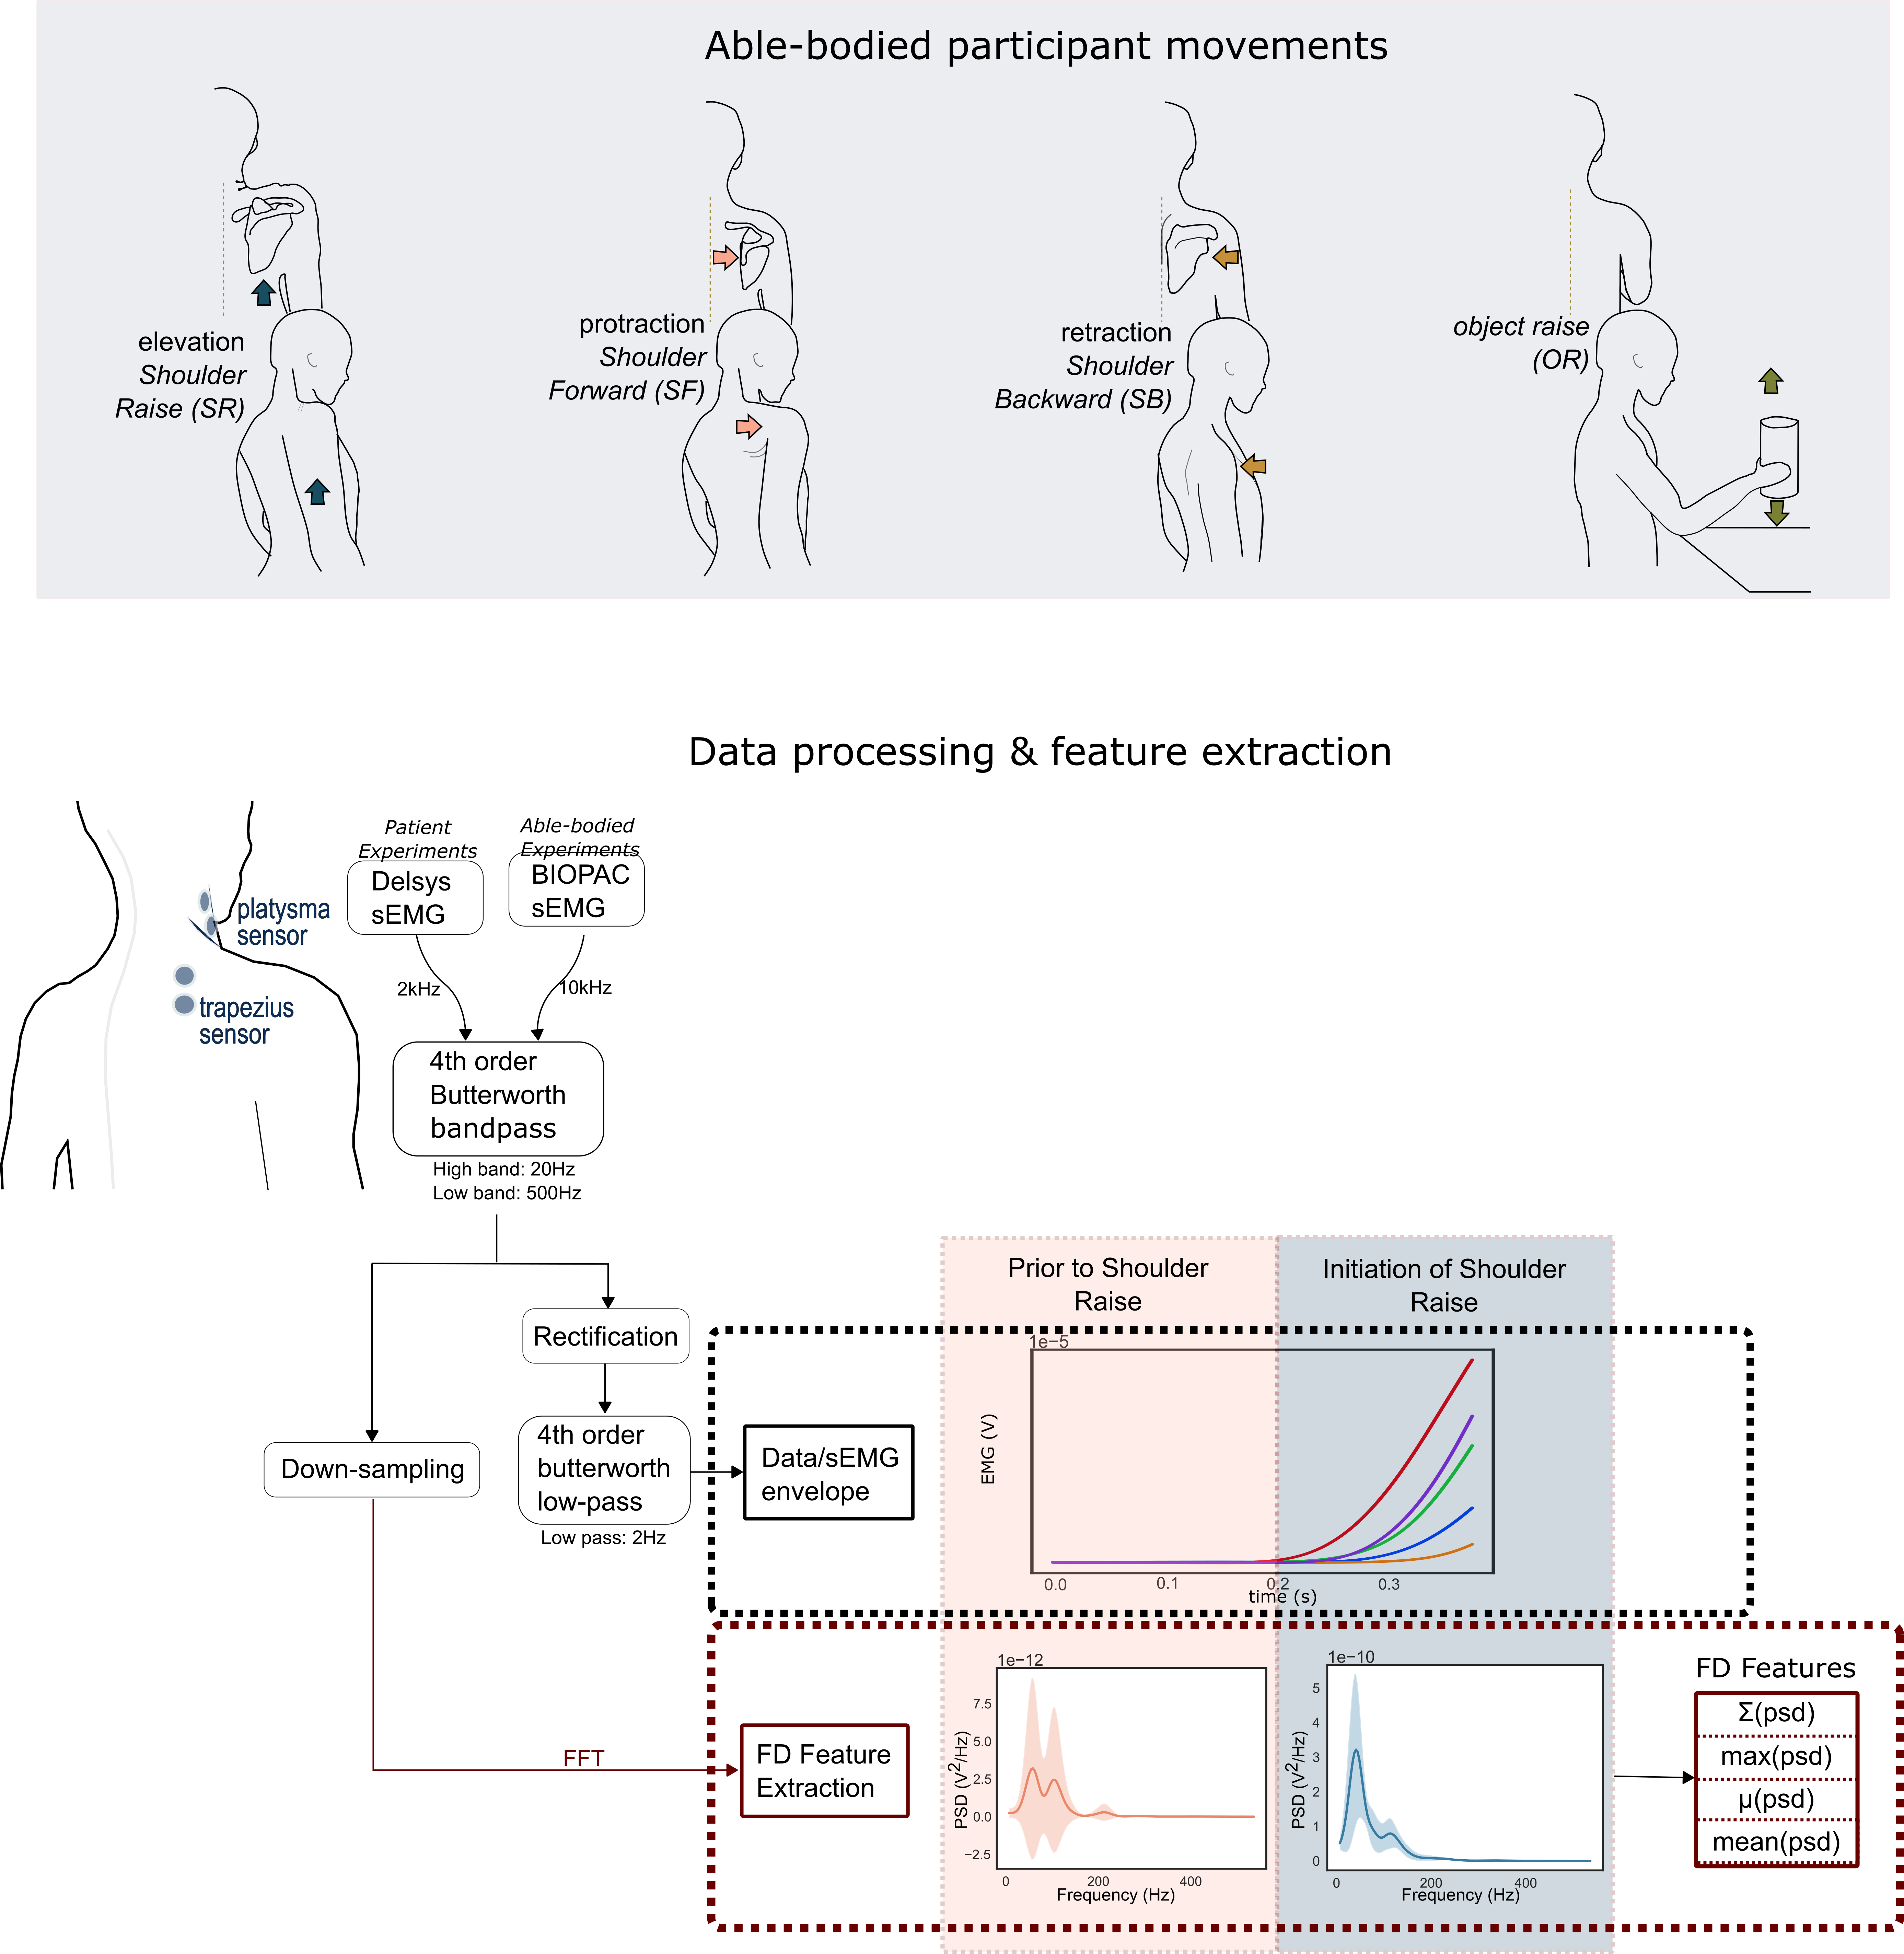 Top: The movements attempted by the able-bodied participants in Protocol A. Bottom: The flow diagram demonstrates the processing of the data leading to the extraction of the frequency domain features.